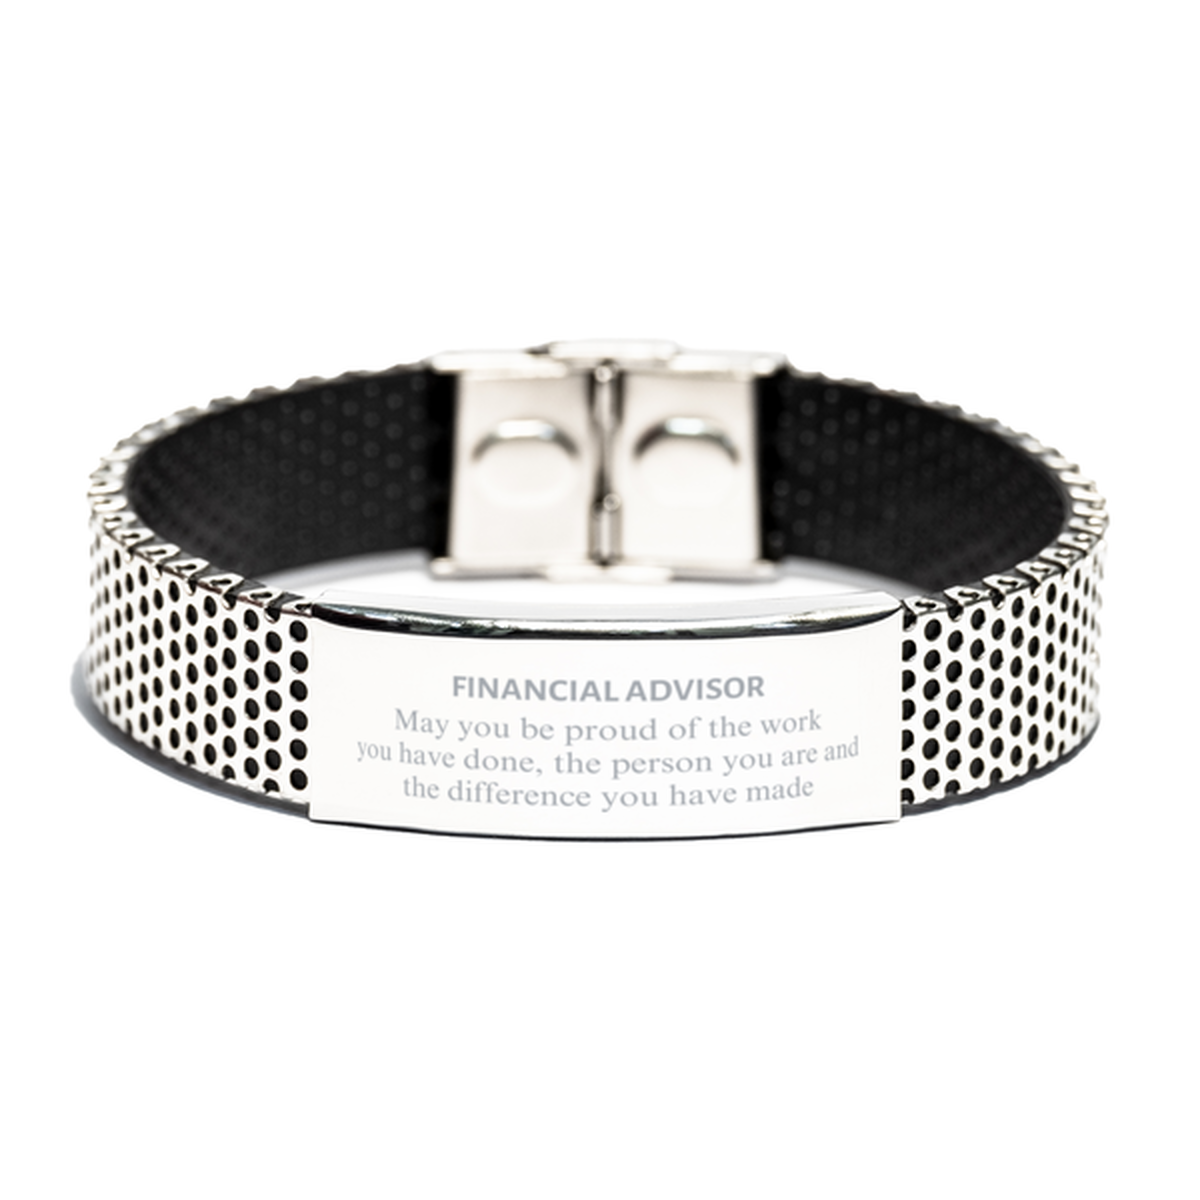 Financial Advisor May you be proud of the work you have done, Retirement Financial Advisor Stainless Steel Bracelet for Colleague Appreciation Gifts Amazing for Financial Advisor